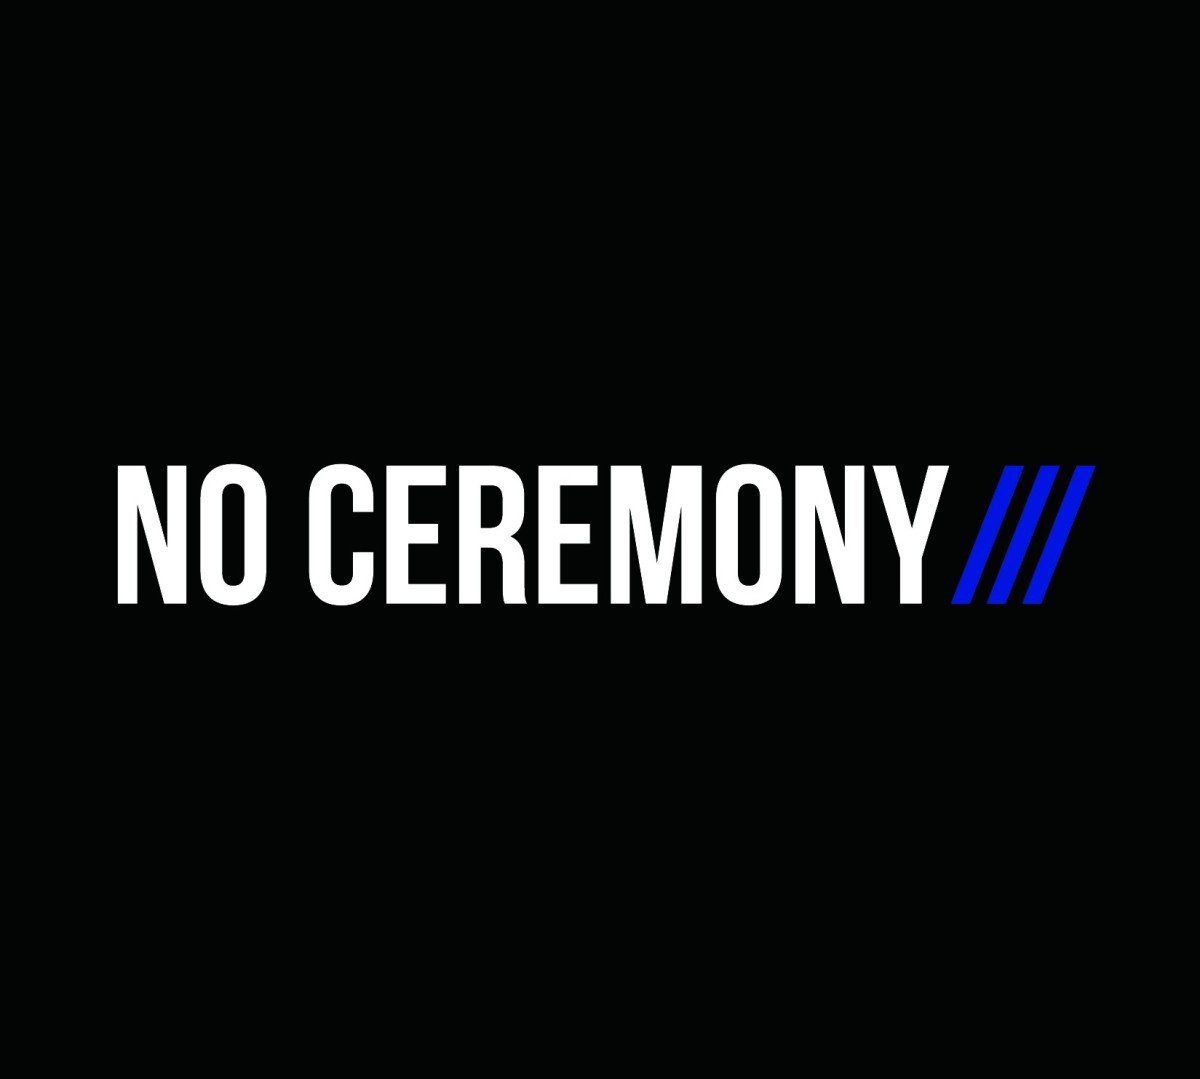 "No Ceremony" the new album from No Ceremony reviewed by Northern Transmissions. "No Ceremony" will be self released by the band on their own label September 2.